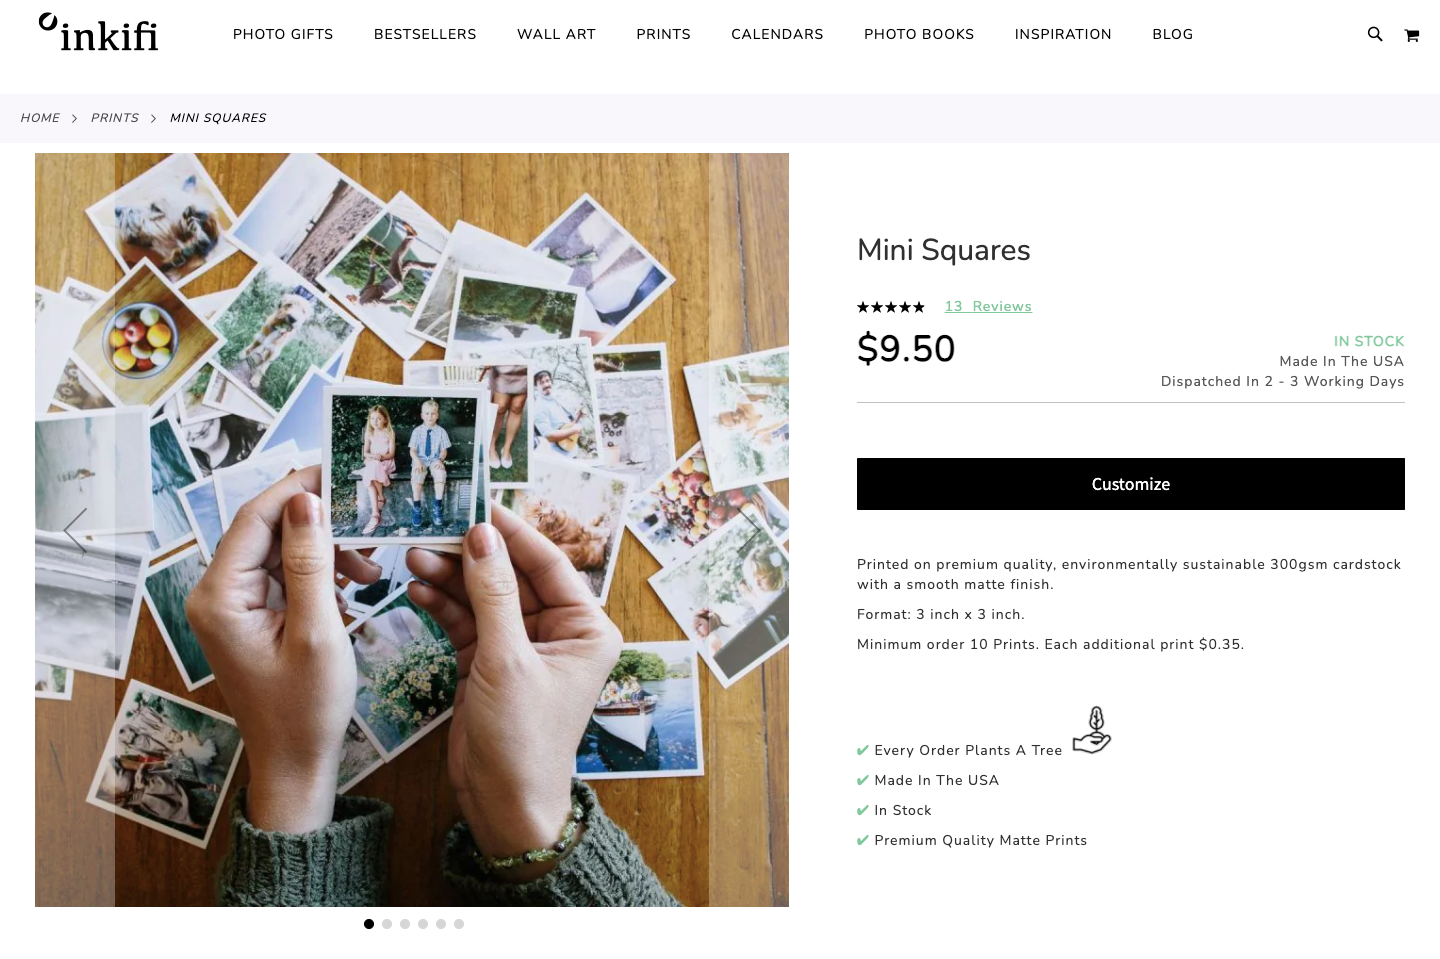 An image from Inkifi website showing photos you can order